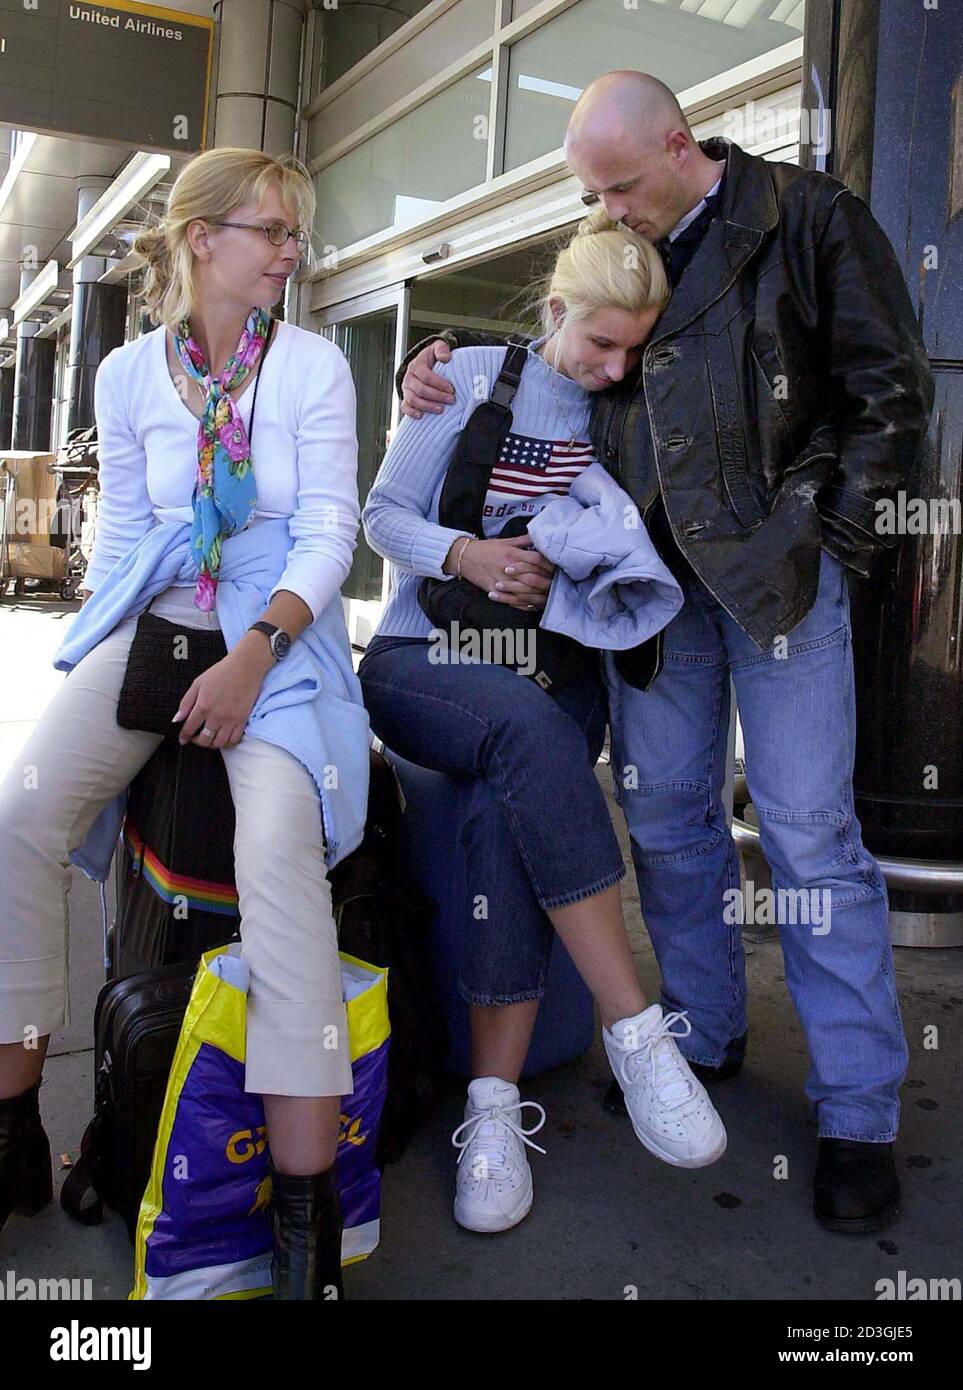 Chantal Blok (L) looks on as her friend Marion Cote (C) is comforted by her  husband Leon Guit after learning about the terrorist attacks in New York  and Washington. The trio, all